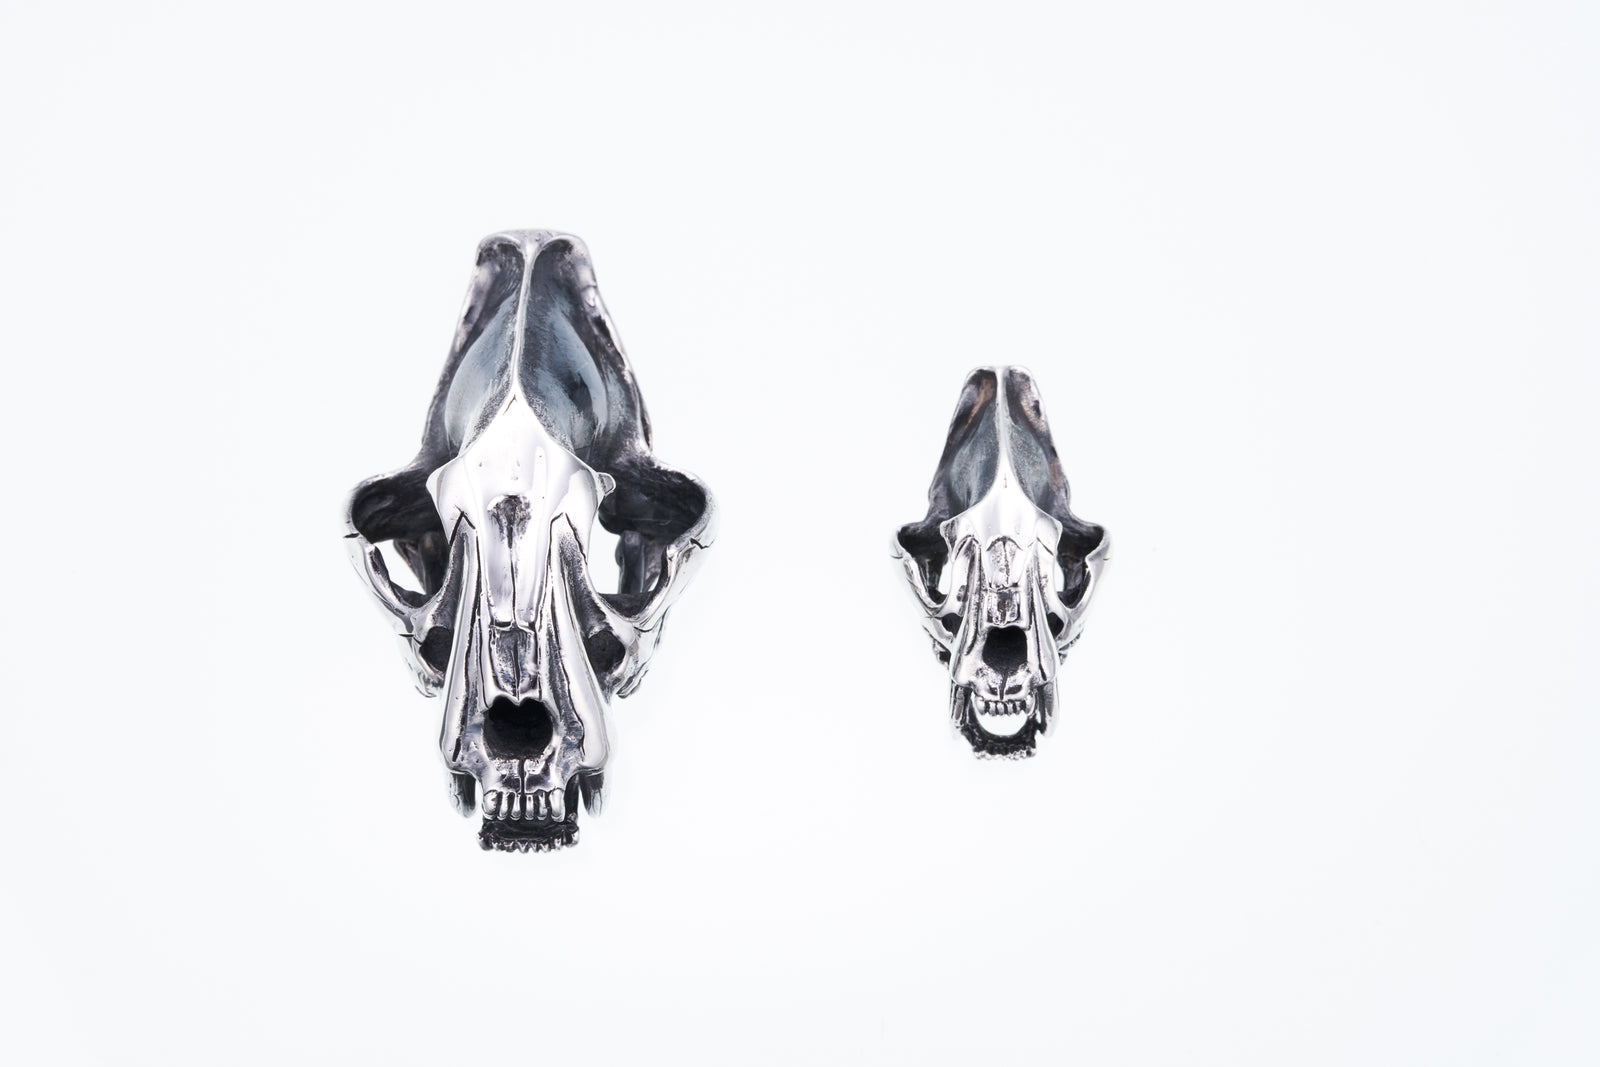 Saber Toothed Tiger Pendant : (S)｜サーベルタイガー・ペンダントトップ (S) – ZOCALO JAPAN  OFFICIAL WEB SITE